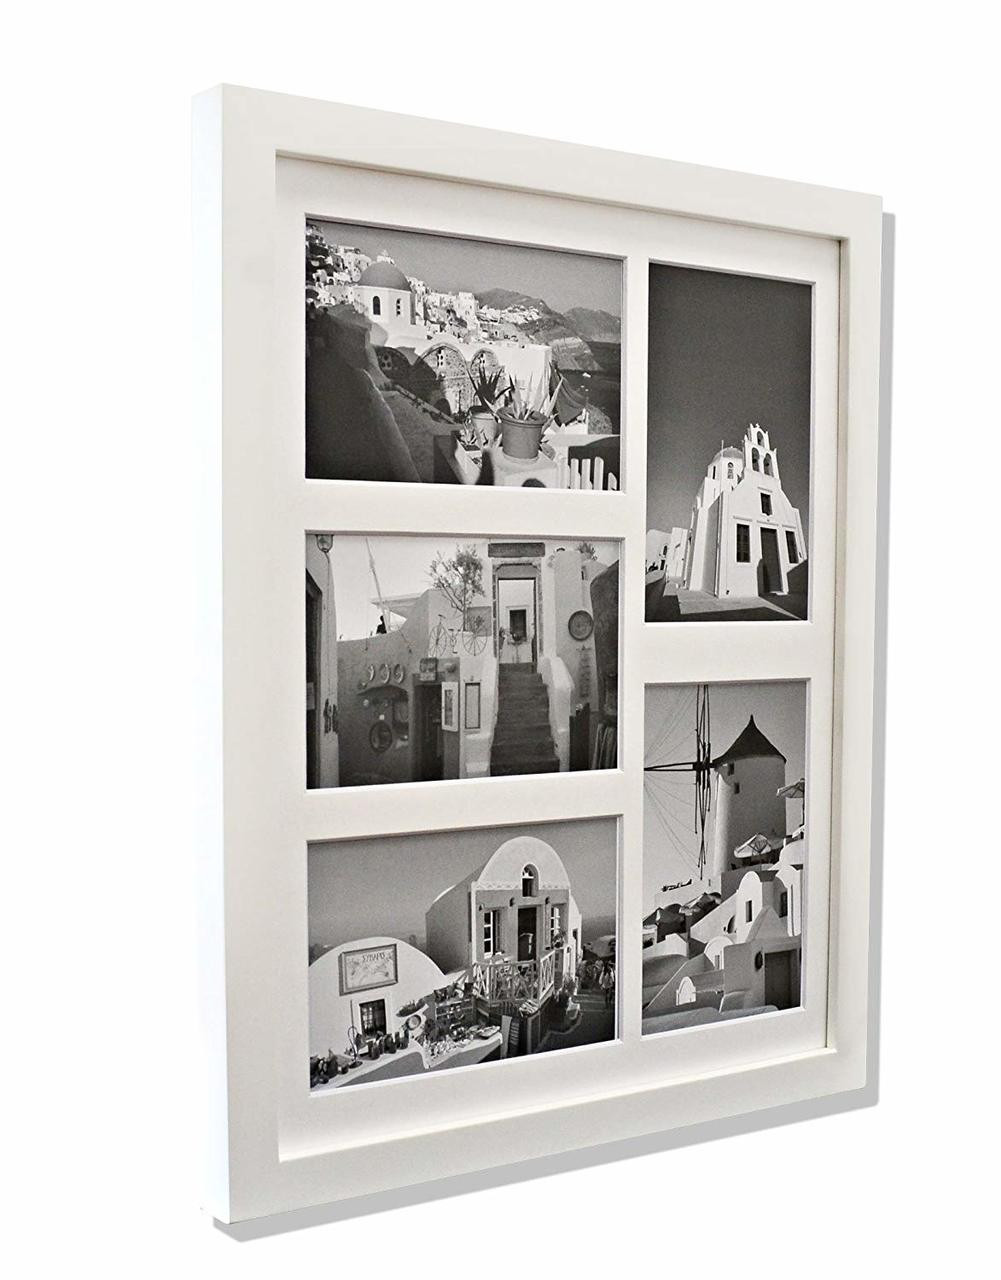 16x20 Frame for 11x14 Picture White Wood (6 Pcs per Box)